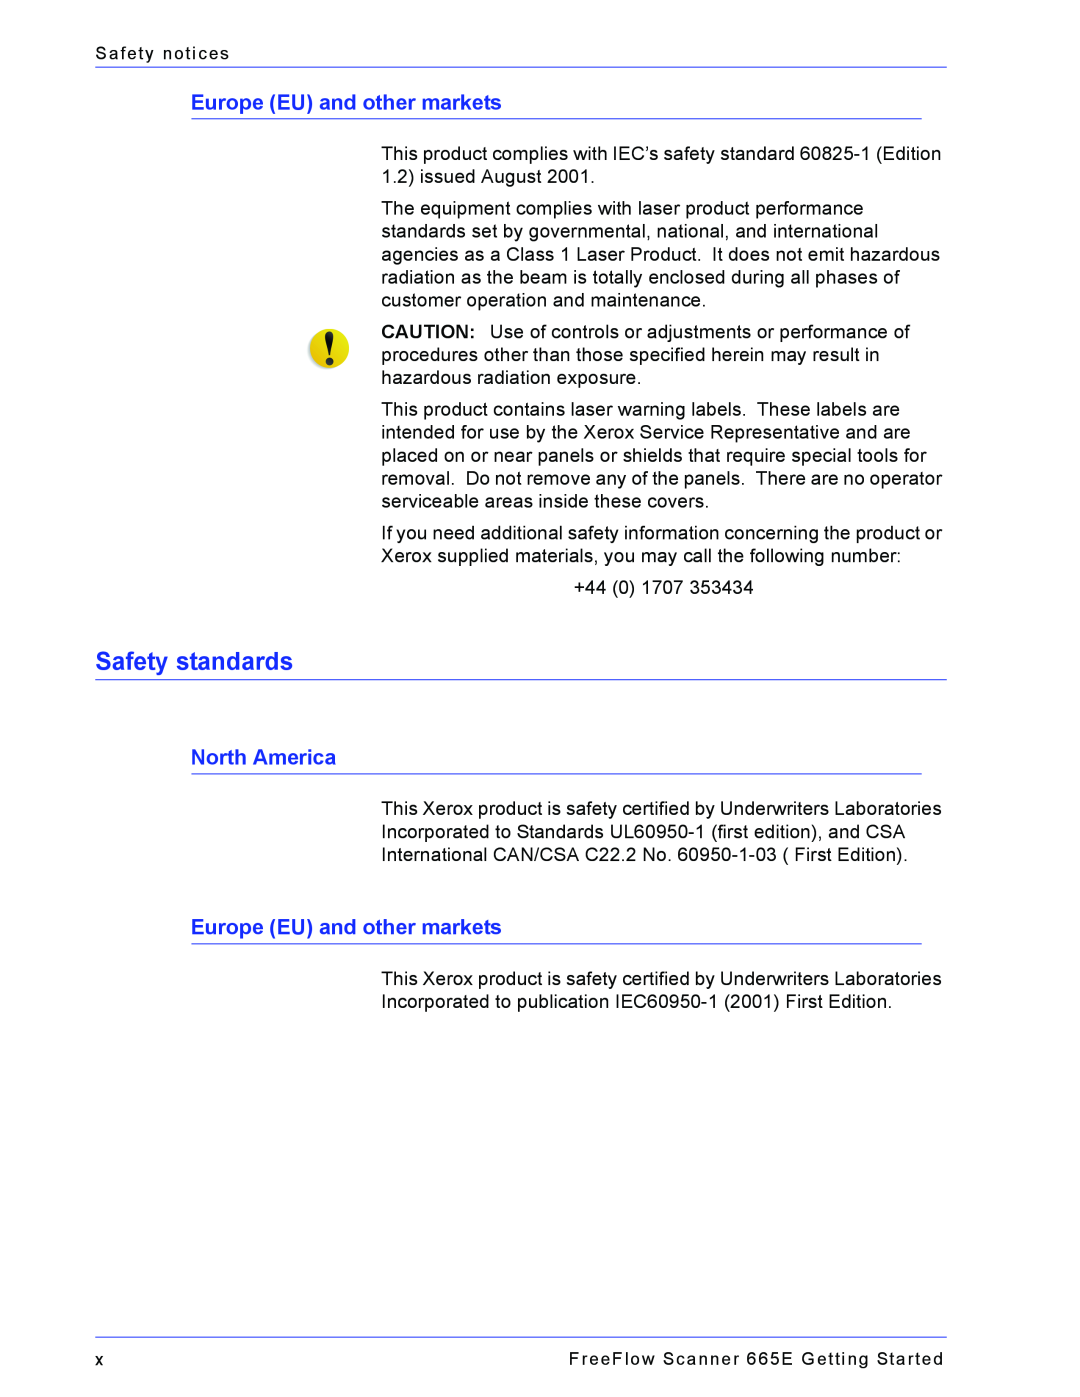 Xerox 665E manual Safety standards, Europe EU and other markets, North America 